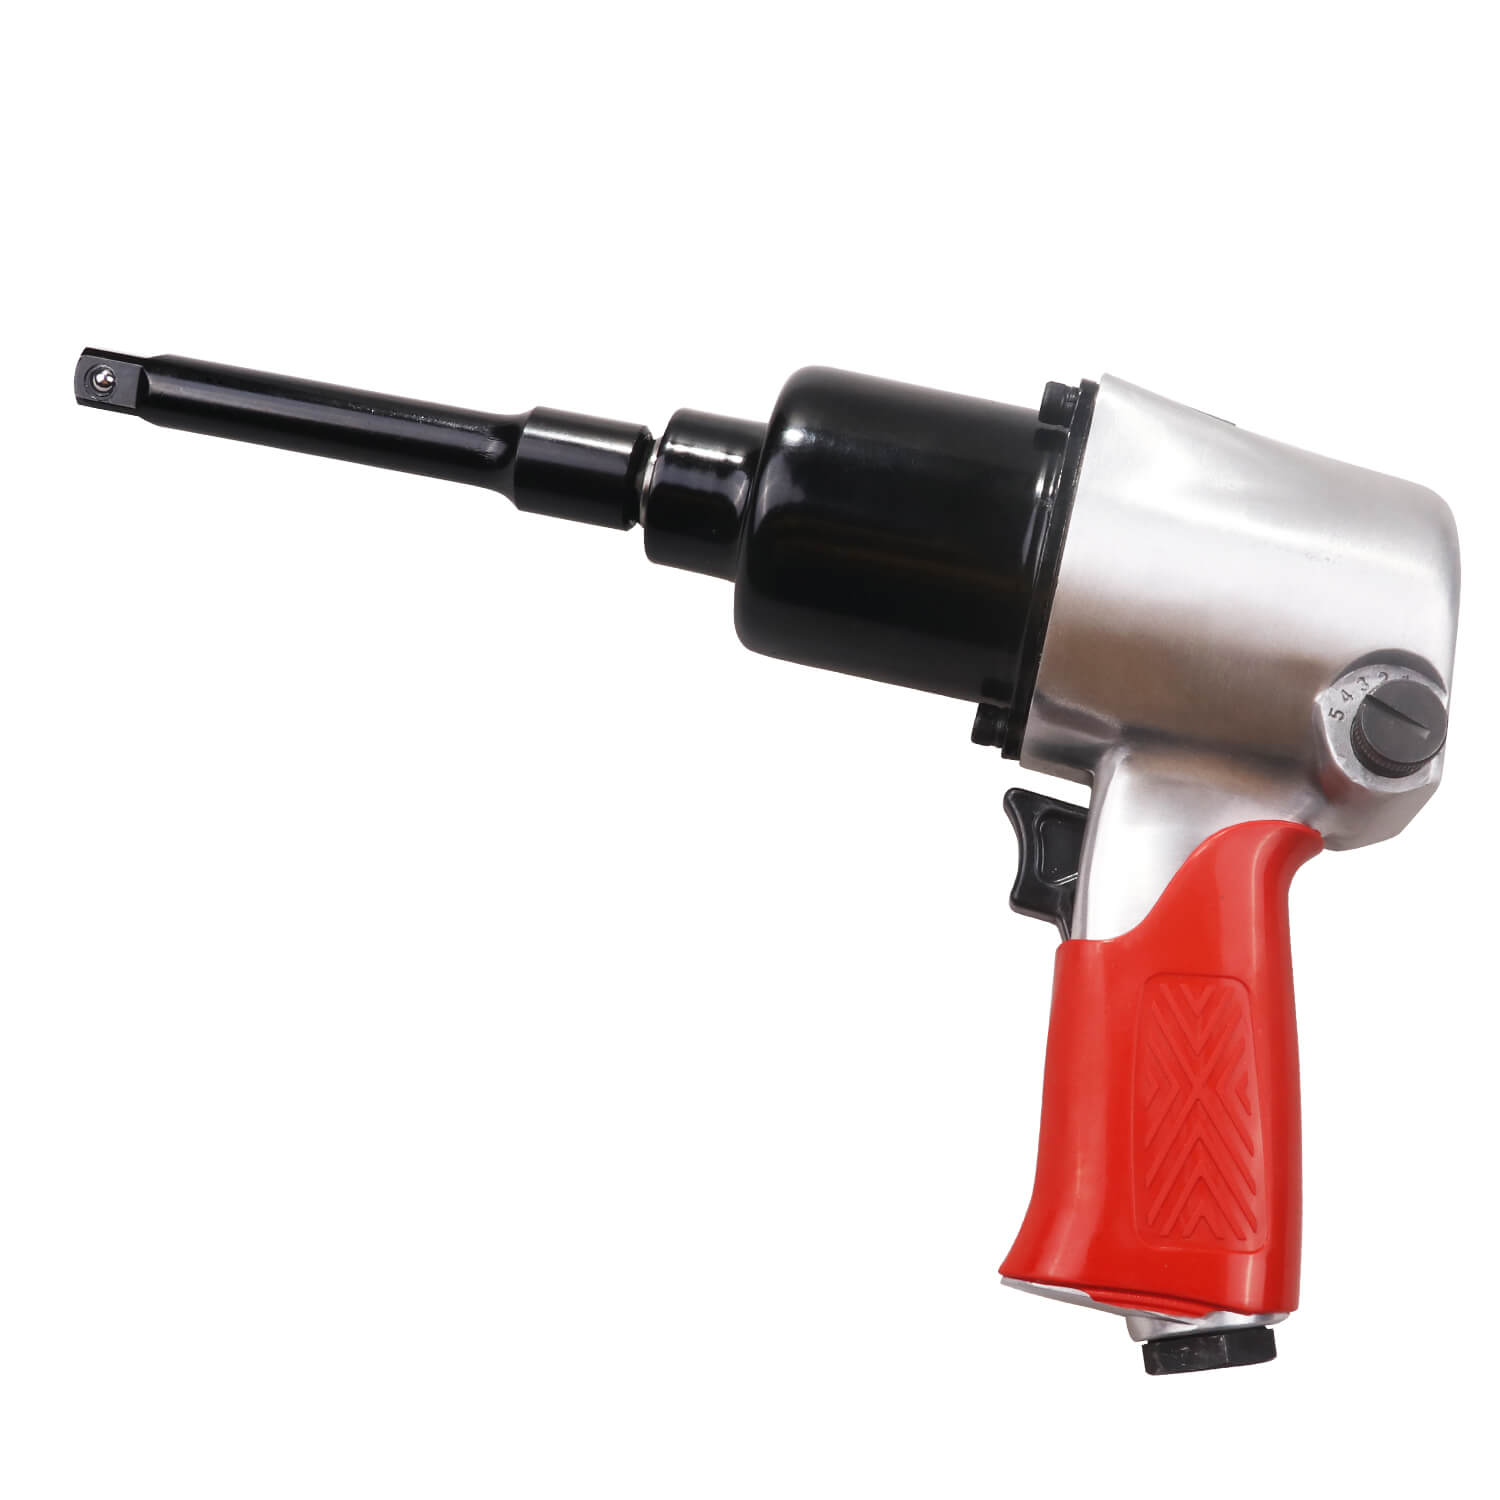 air impact wrench details